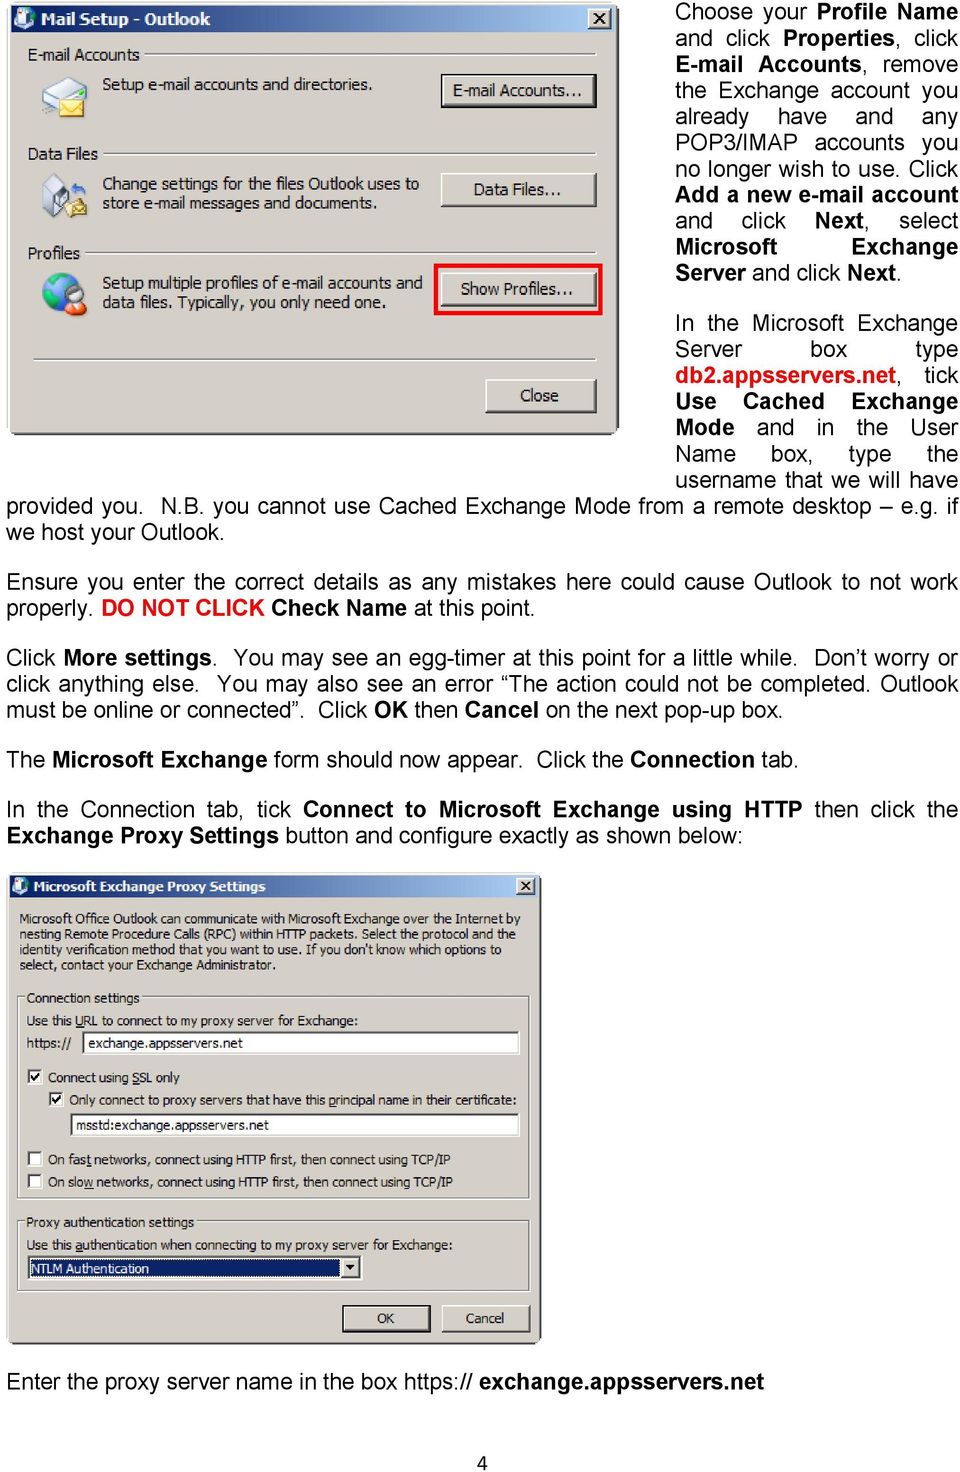 net, tick Use Cached Exchange Mode and in the User Name box, type the username that we will have provided you. N.B. you cannot use Cached Exchange Mode from a remote desktop e.g. if we host your Outlook.